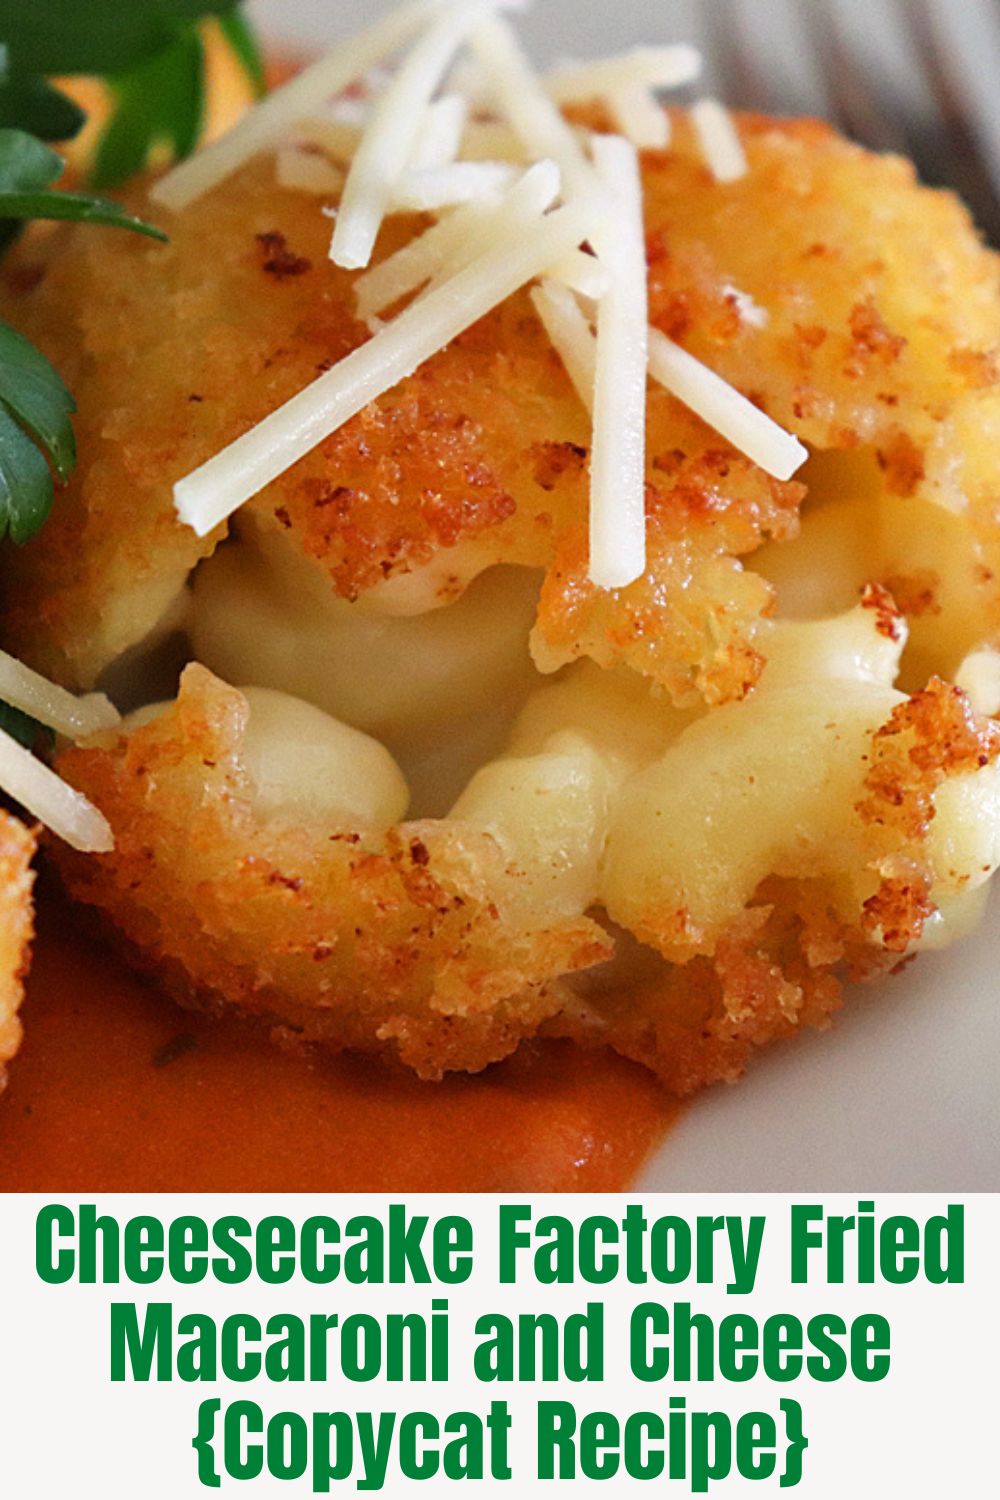 PIN for Cheesecake Factory Fried Macaroni and Cheese Balls Recipe